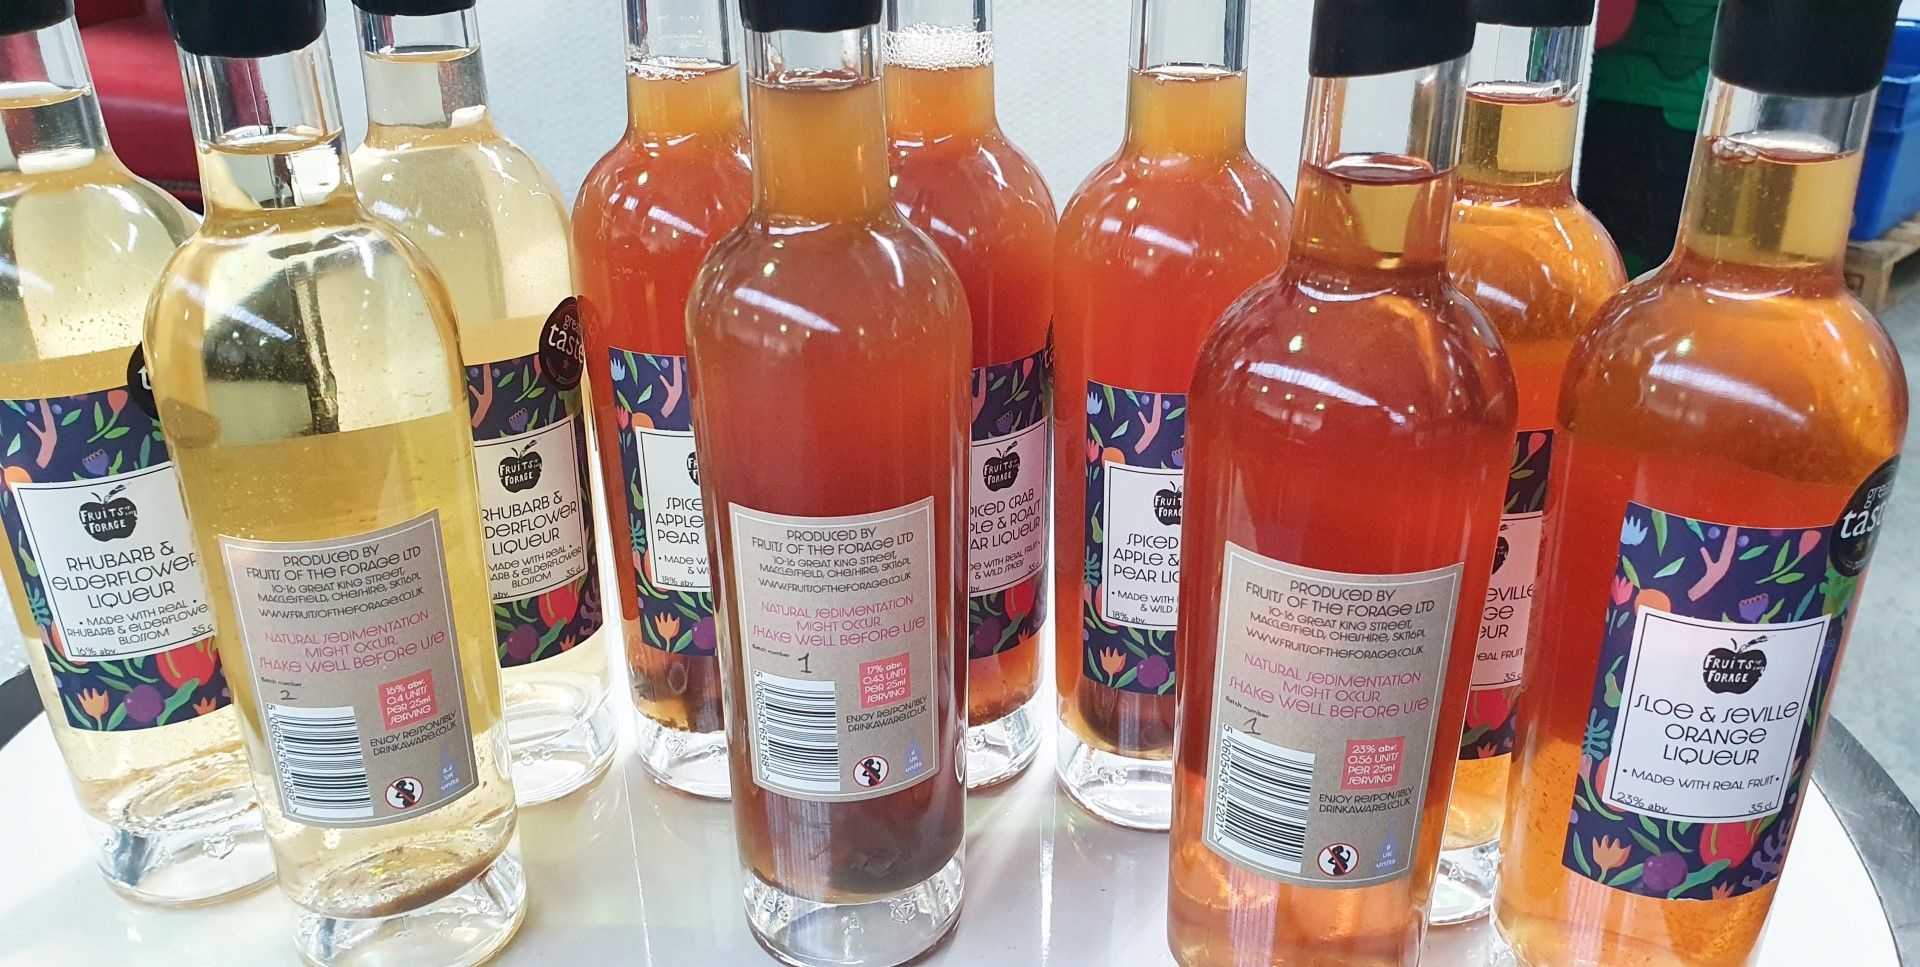 10 x Bottles of Fruits of the Forage 35cl Liqueur - Includes Assorted Flavours - 16% and 18% Volumes - Image 2 of 2